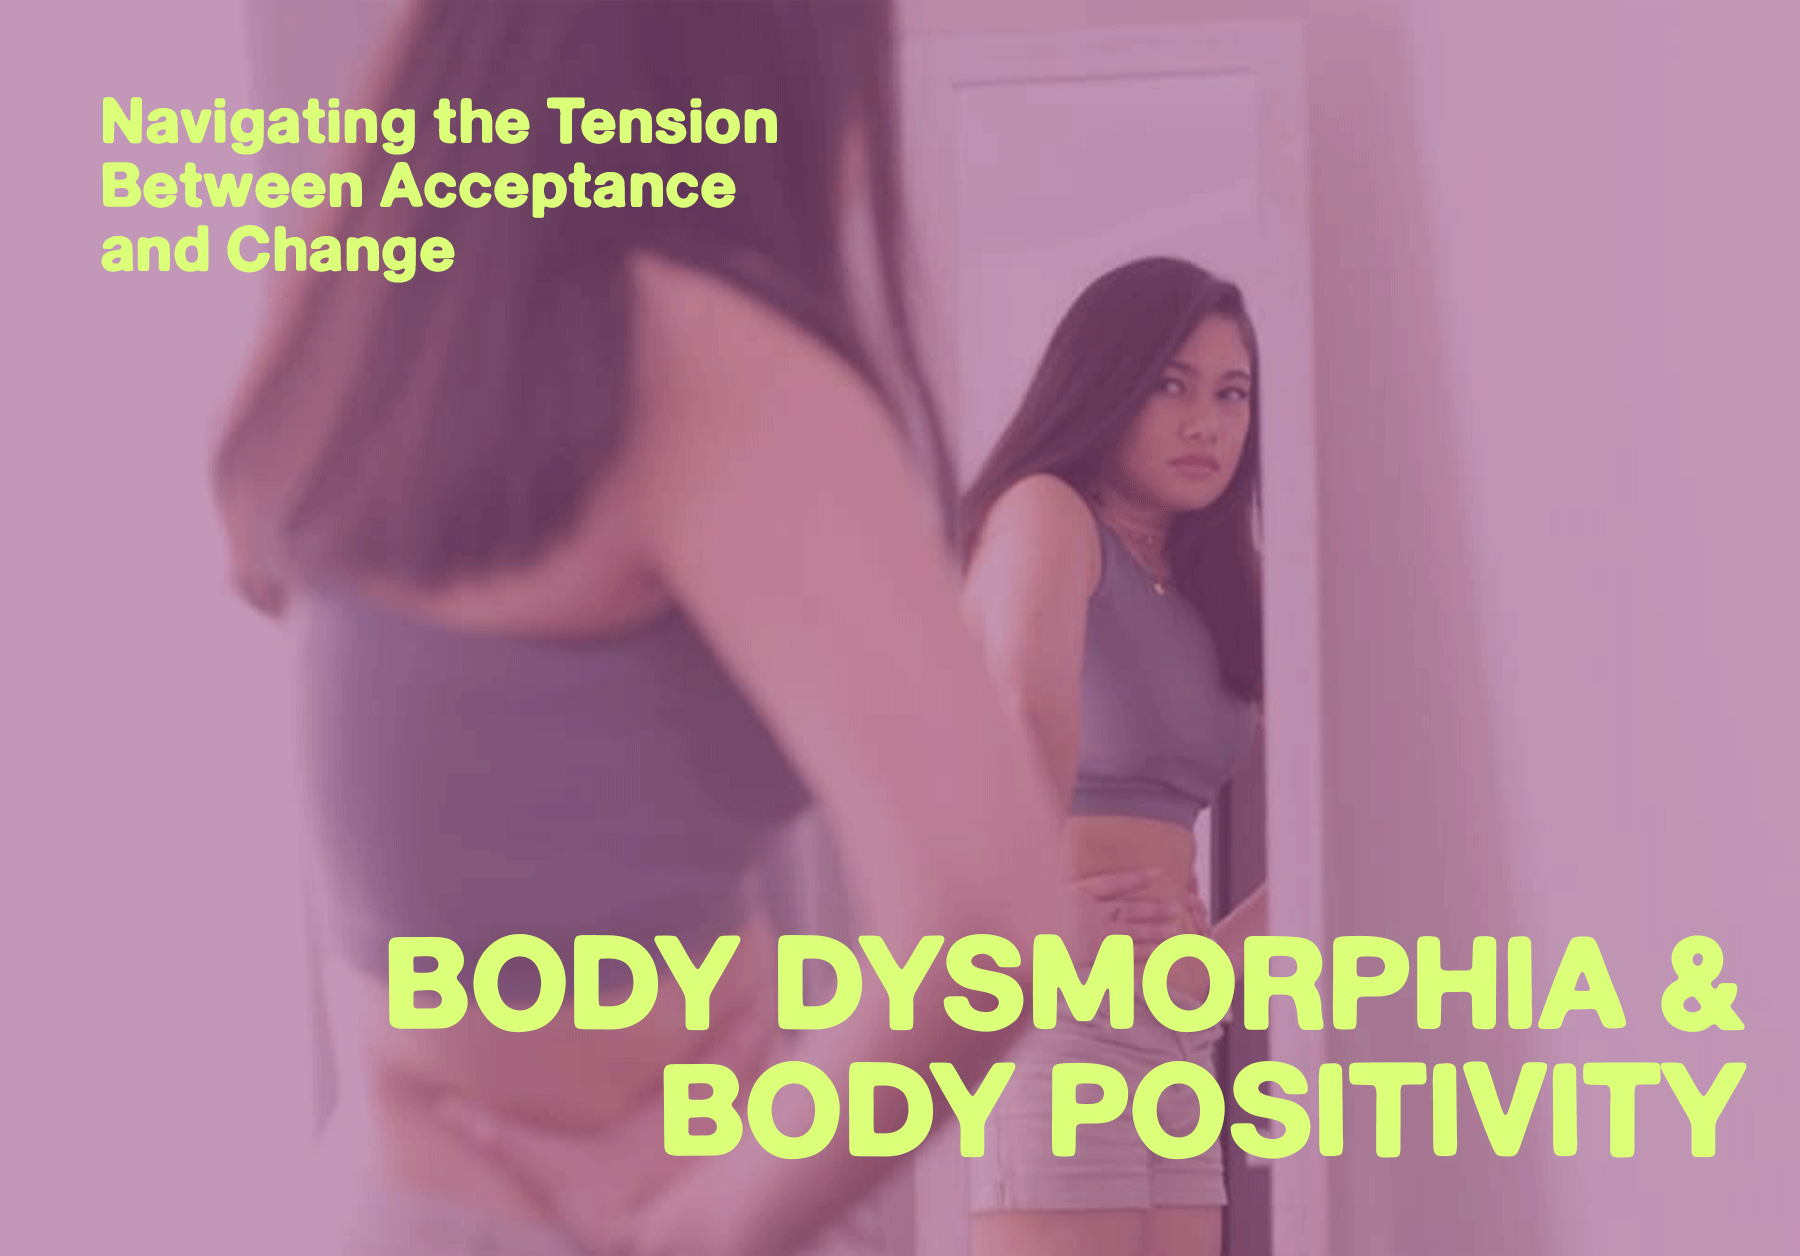 Body Dysmorphia and Body Positivity: Navigating the Tension Between Acceptance and Change